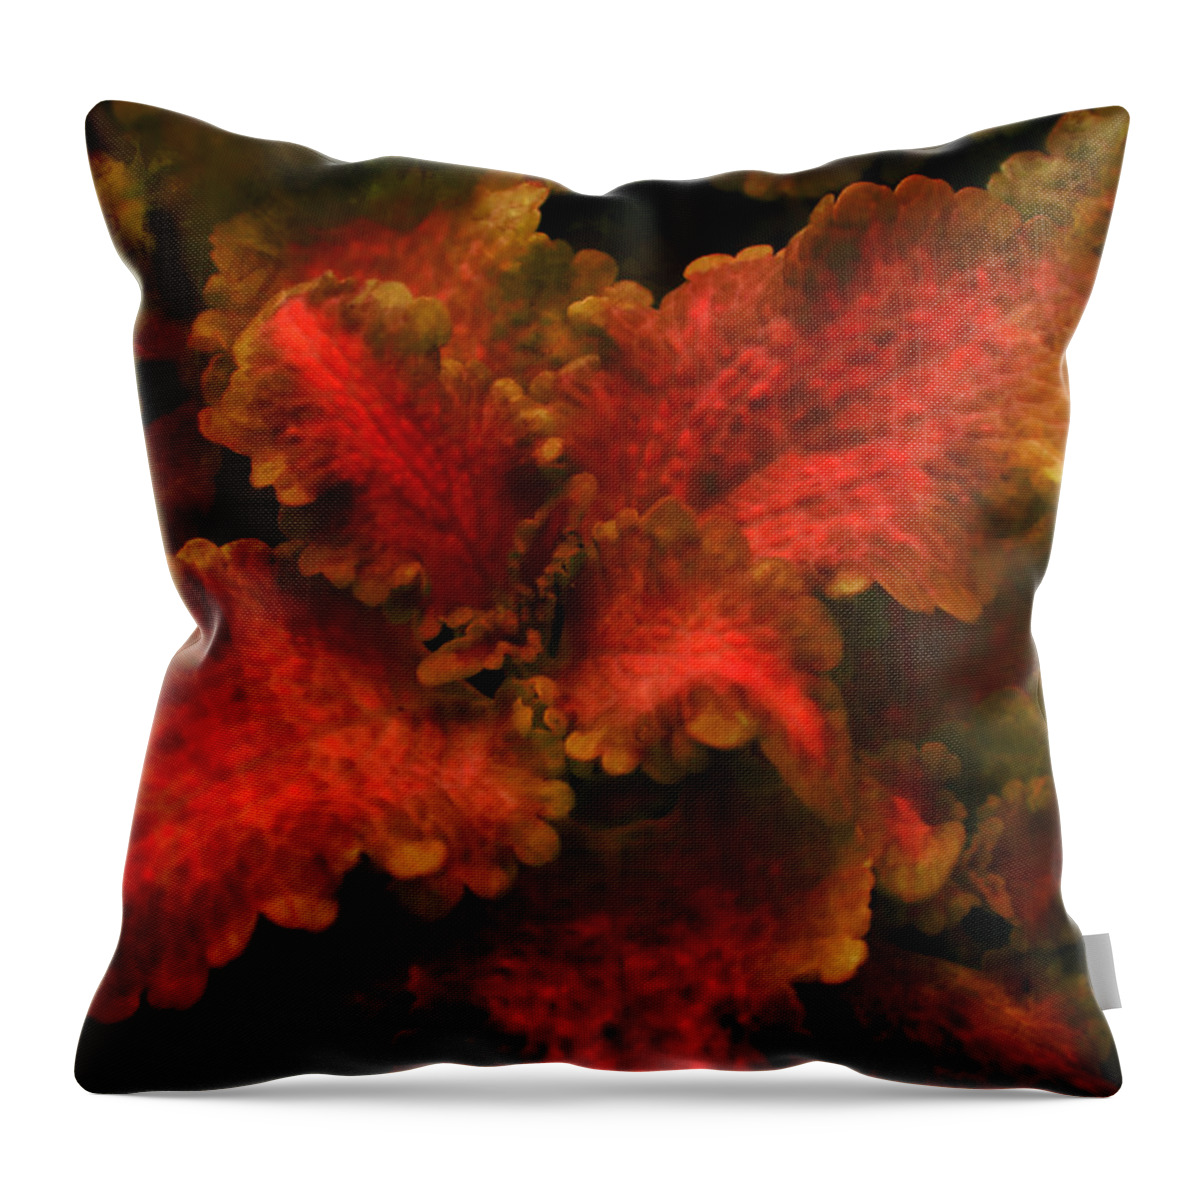 Coleus Throw Pillow featuring the photograph Coleus 3 by Deena Stoddard